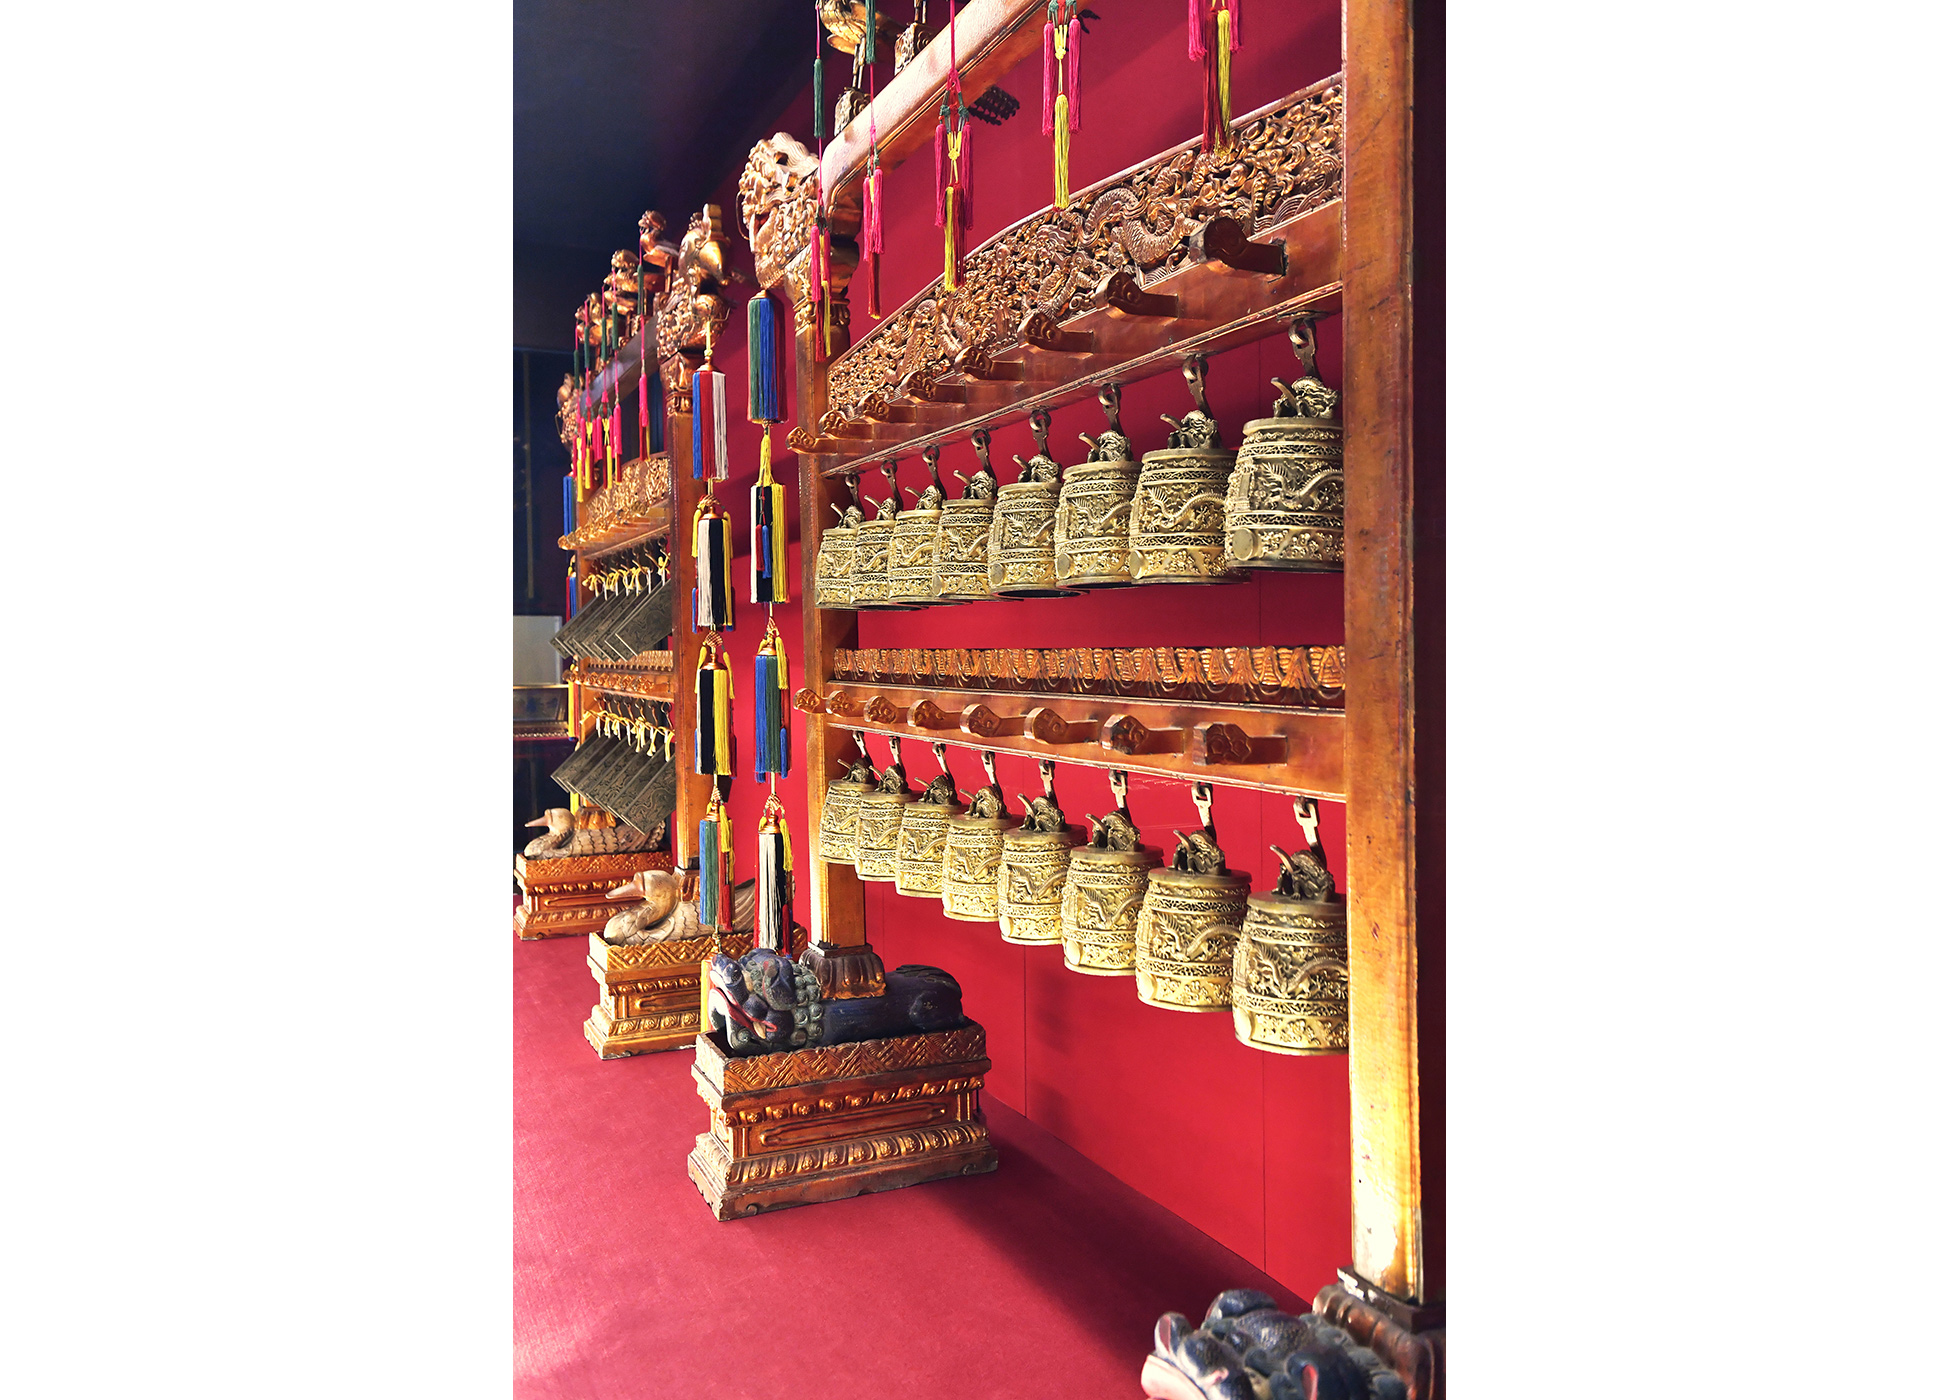 The deep green jade chimes and bronze bells used to play music for birthday celebrations in the Qing Court on display at the Hong Kong Museum of History.